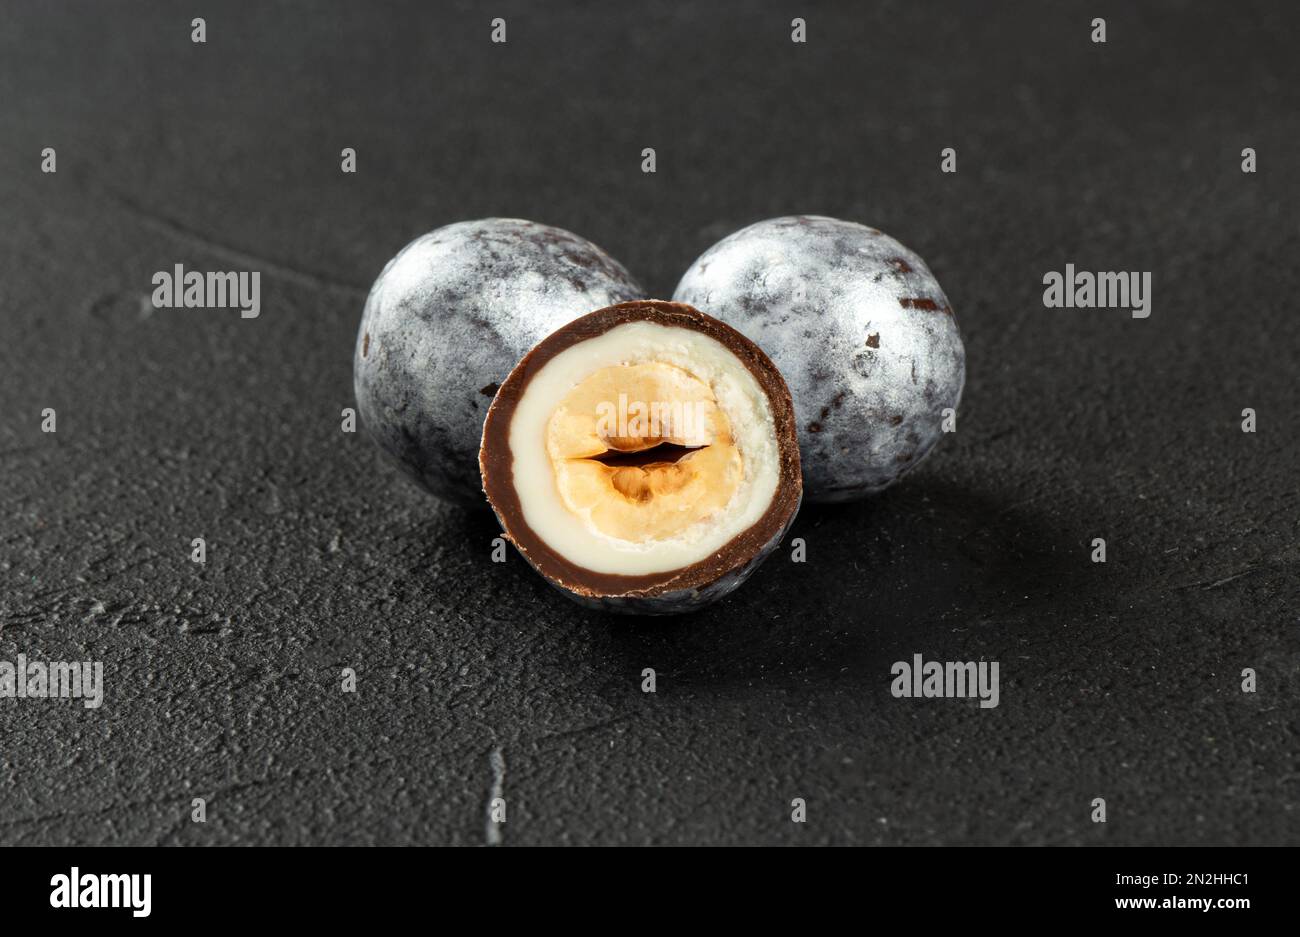 Two silver hazelnut candies in chocolate with a cut half close-up on a dark concrete background. Stock Photo